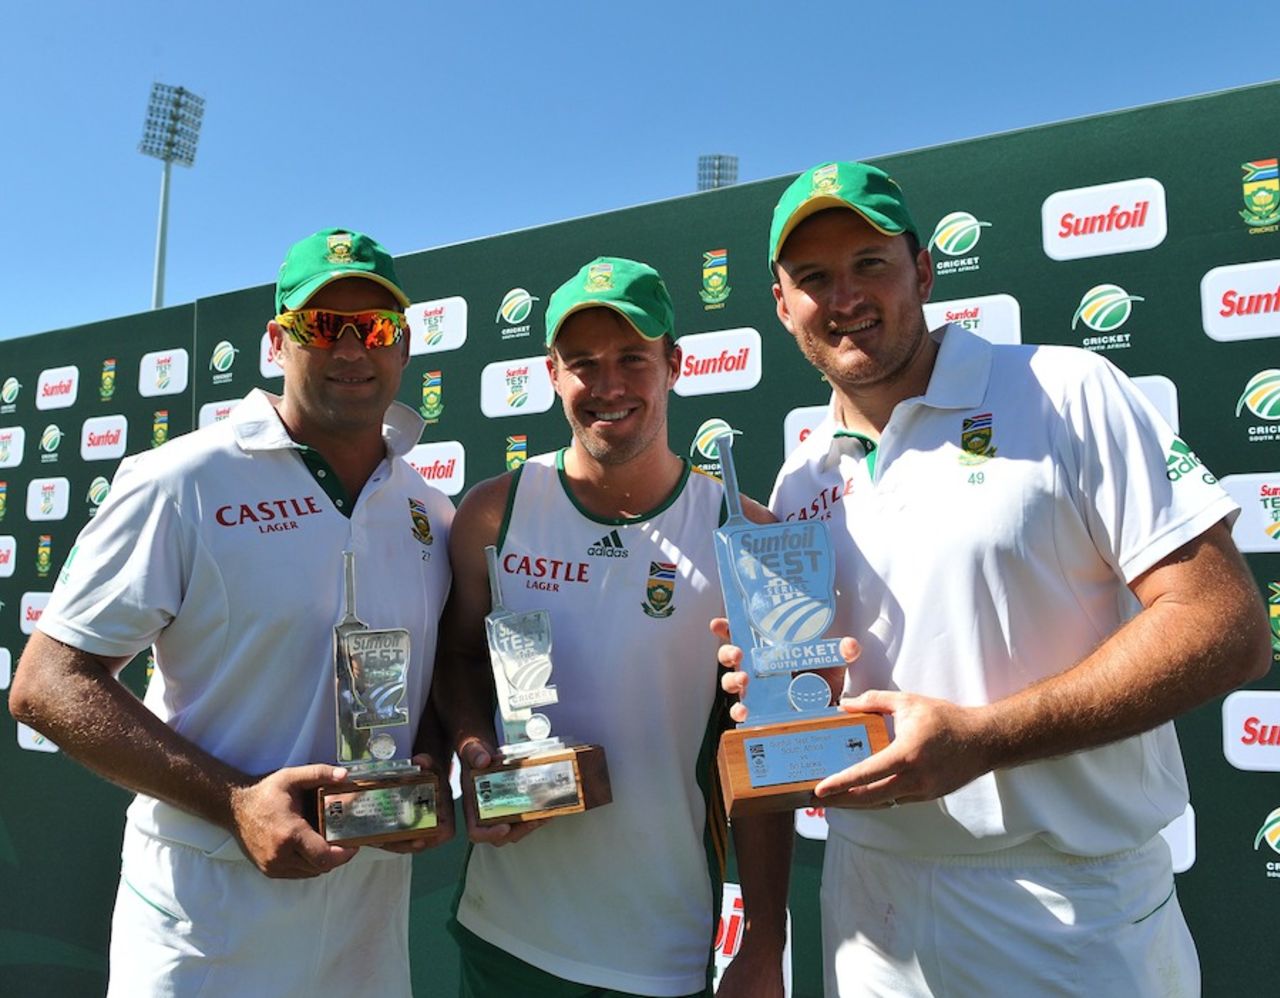 Jacques Kallis, AB de Villiers and Graeme Smith with their trophies, South Africa v Sri Lanka, 3rd Test, Cape Town, January, 6, 2012